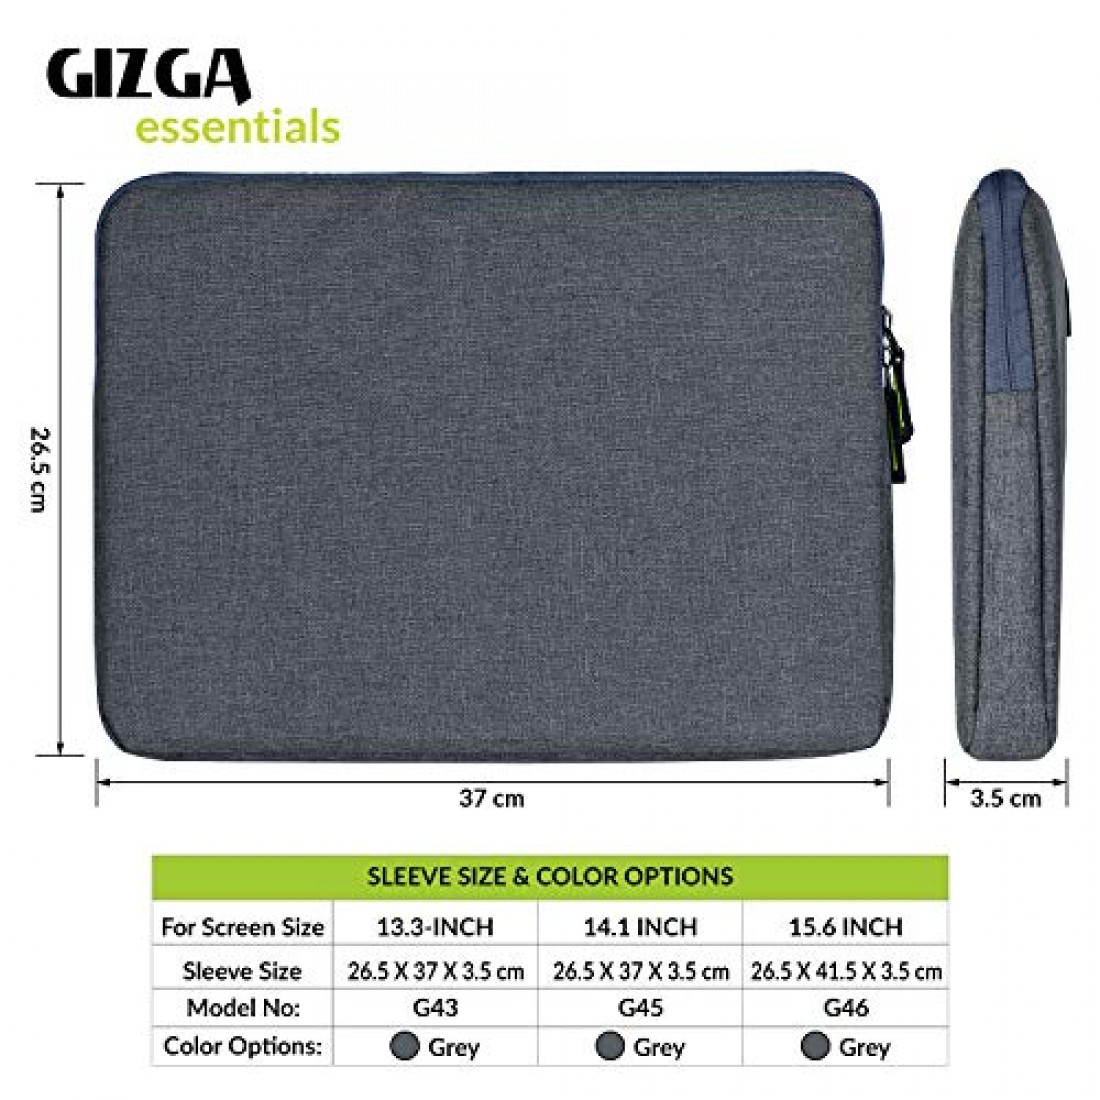 Buy Gizga Essentials Laptop Bag Sleeve for 14 inch Laptop Case Cover ...